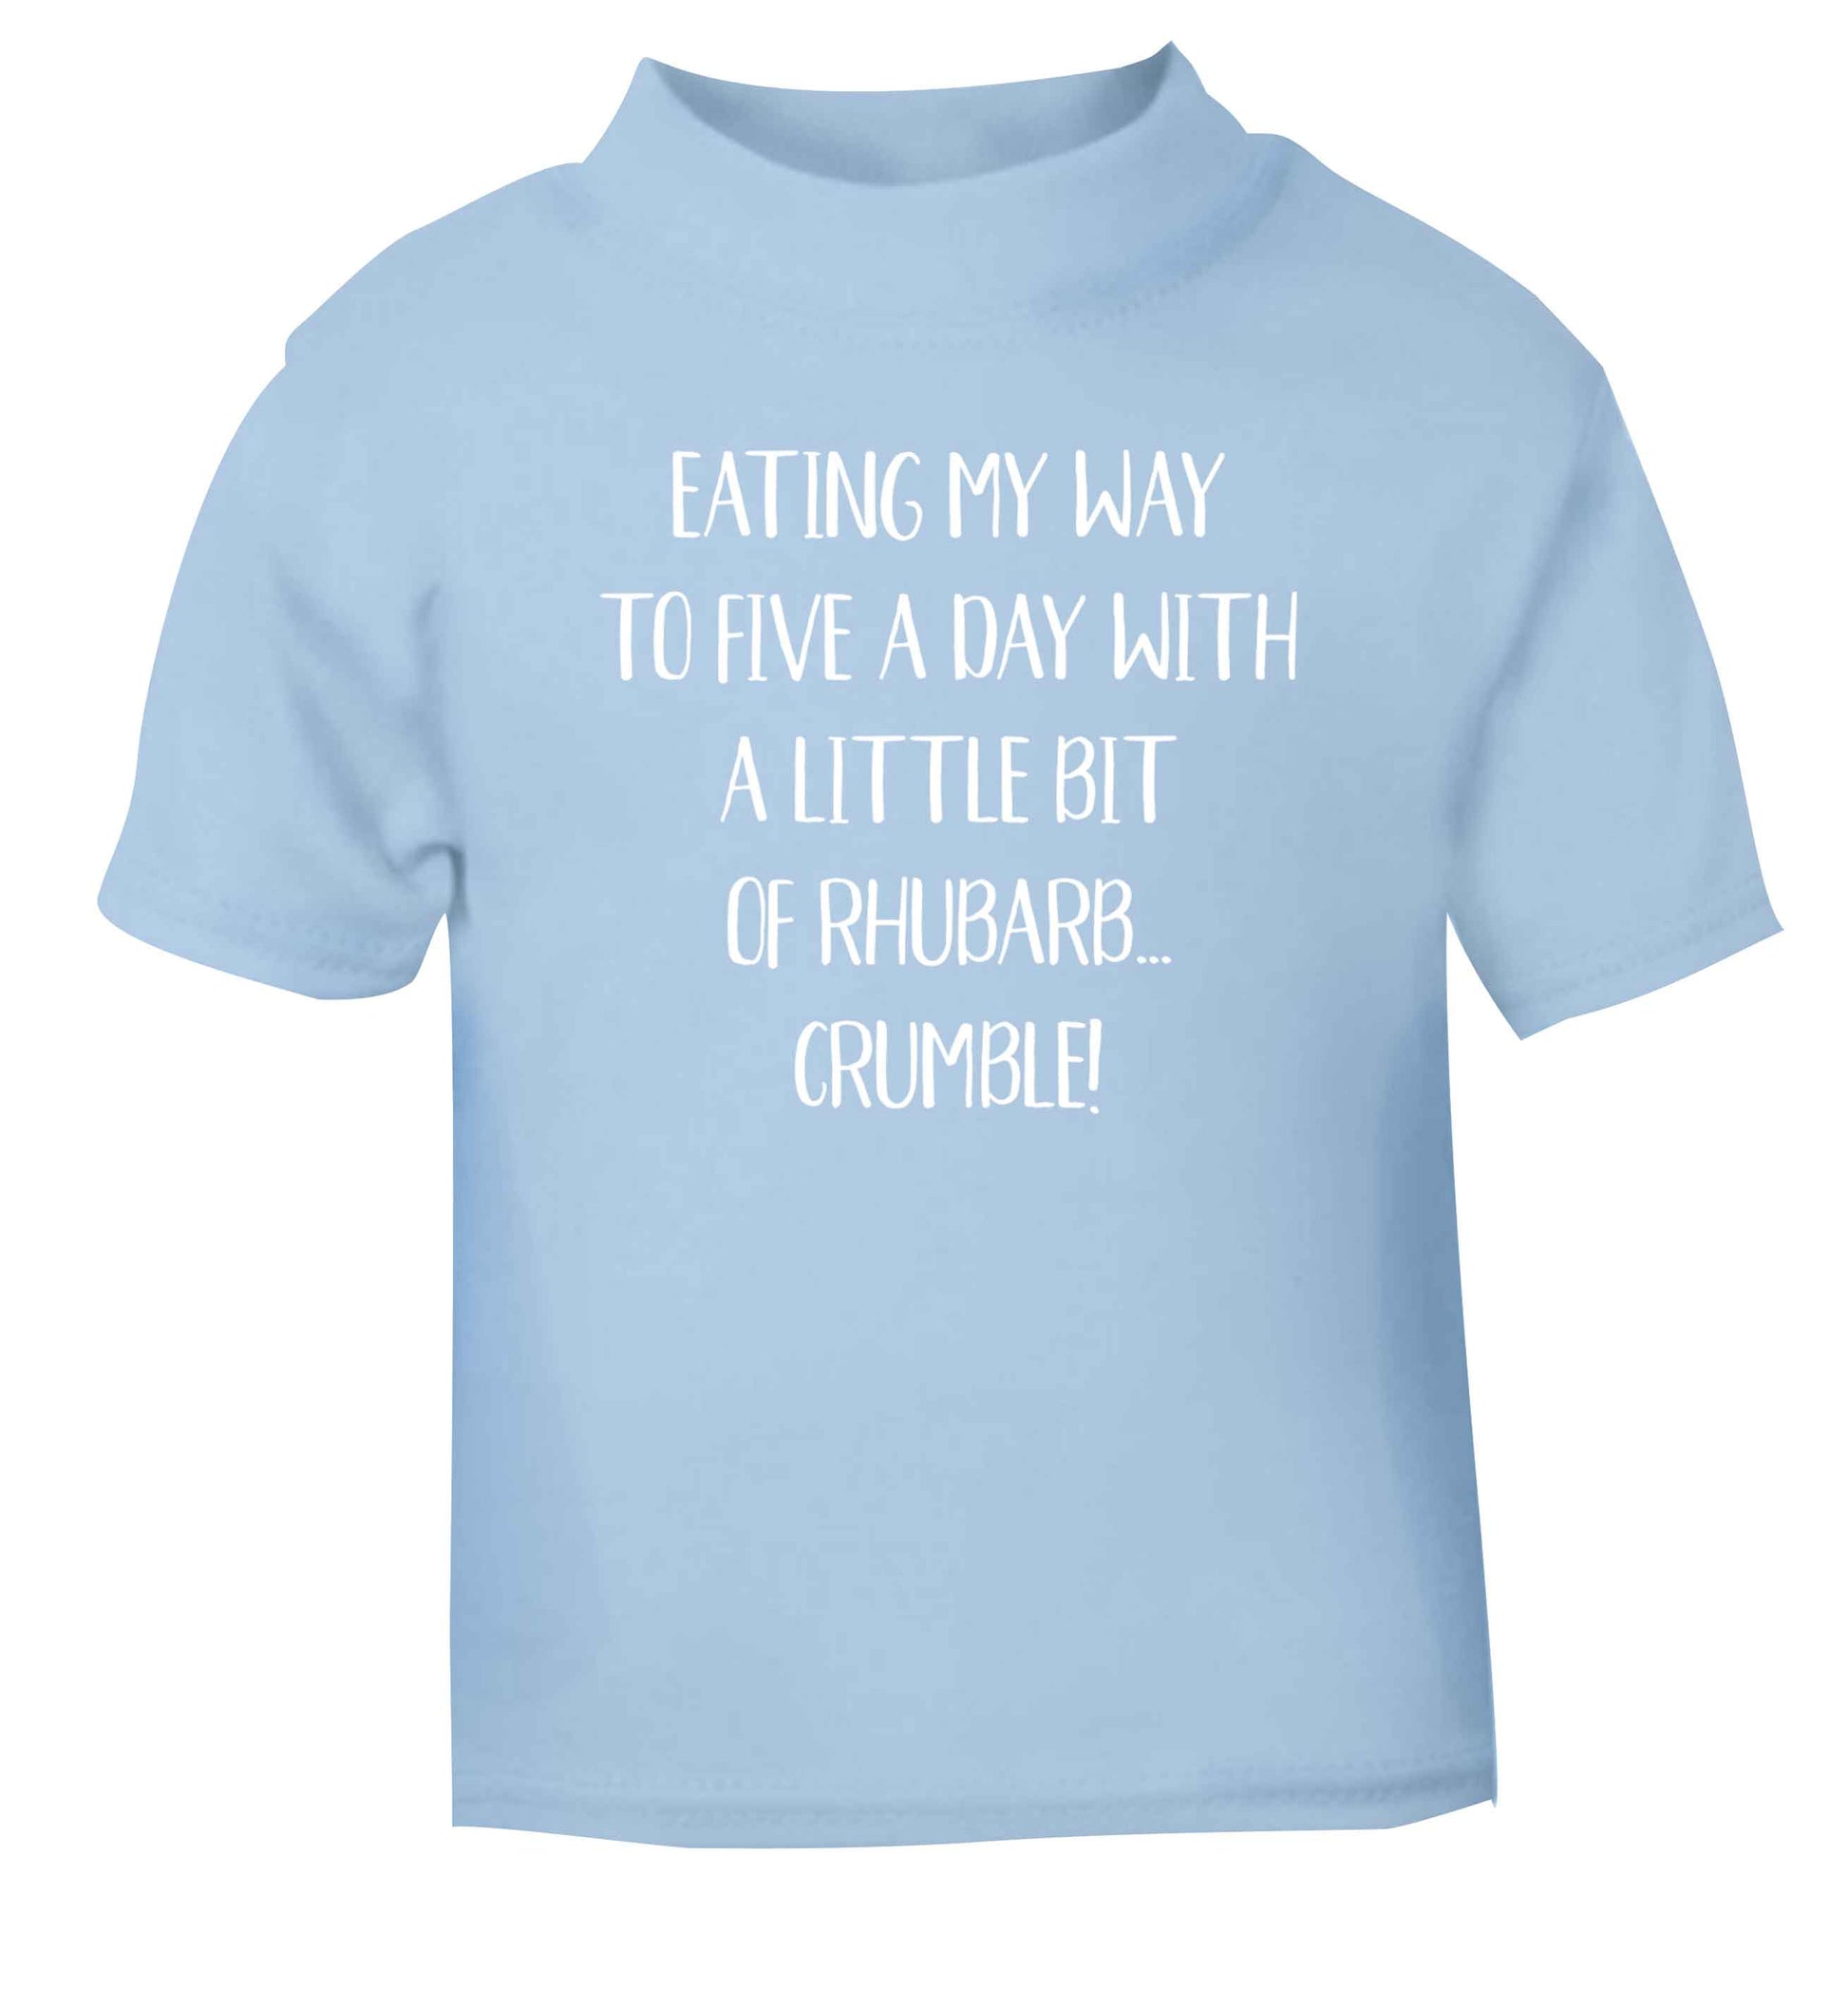 Eating my way to five a day with a little bit of rhubarb crumble light blue Baby Toddler Tshirt 2 Years